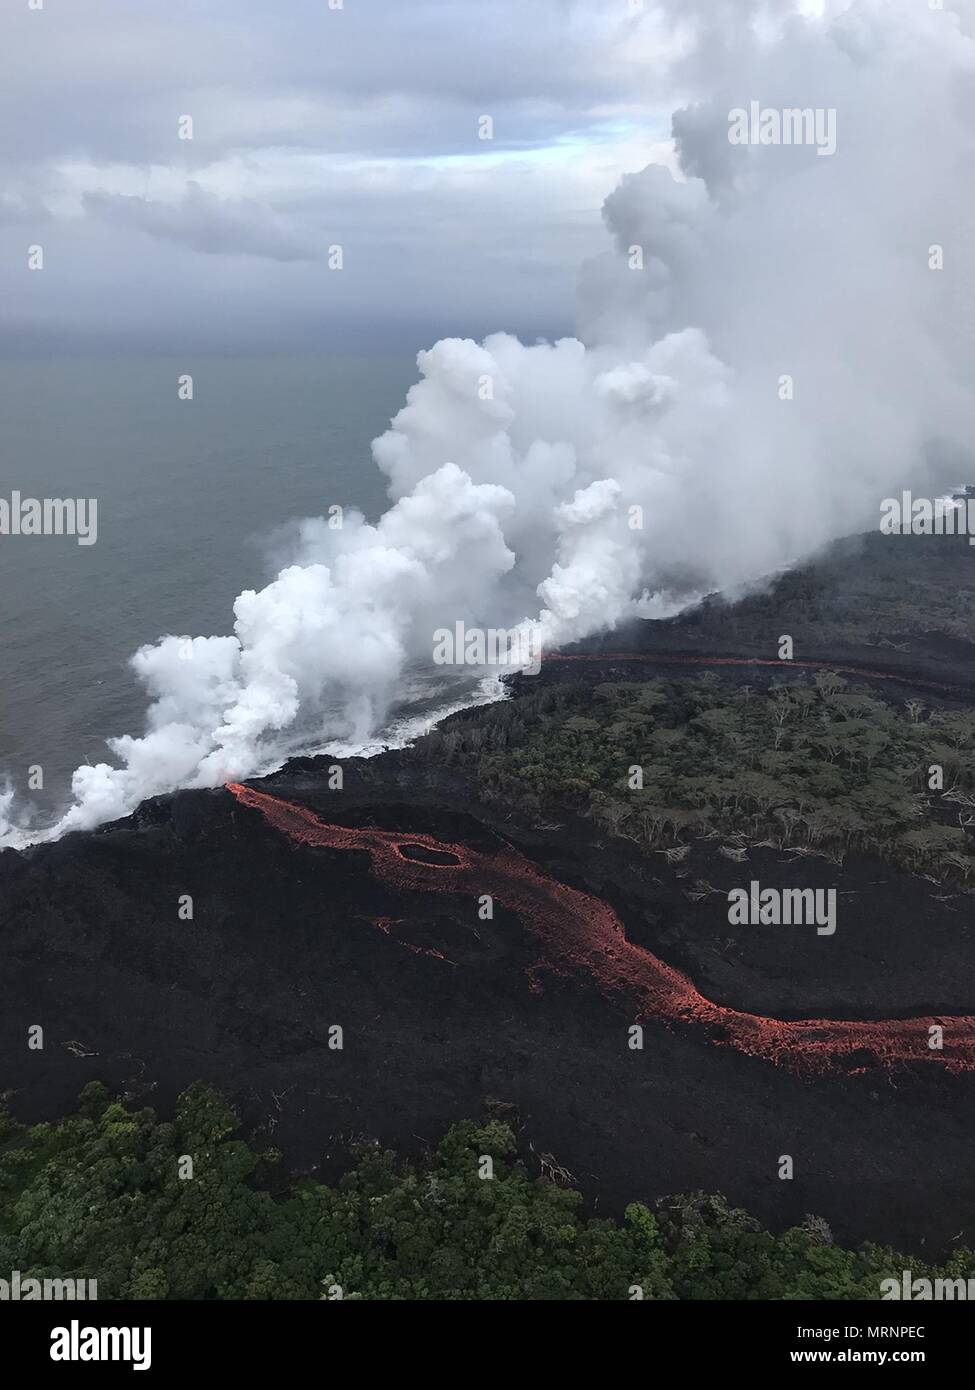 Lava and poisonous sulfur dioxide plumes rise as molten magma reaches the ocean from the eruption of the Kilauea volcano May 21, 2018 in Pahoa, Hawaii. Hot lava entering the ocean creates a dense white plume called 'laze' (short for 'lava haze'). Laze is formed as hot lava boils seawater to dryness. The process leads to a series of chemical reactions that create a billowing white cloud composed of a condensed seawater steam, hydrochloric acid gas, and tiny shards of volcanic glass. The cloud is as corrosive as dilute battery acid, and should be avoided. Stock Photo